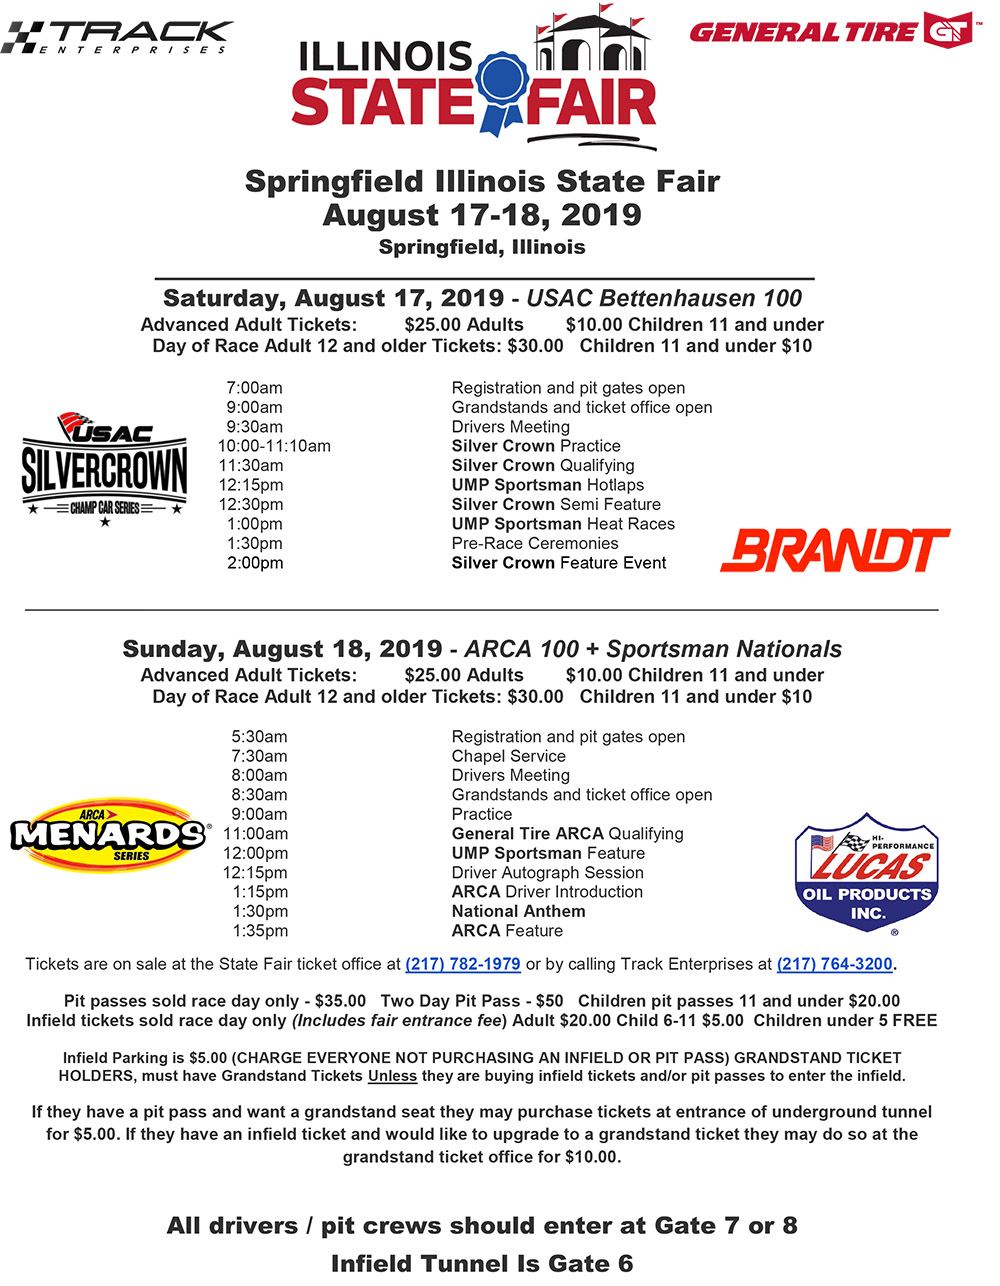 8-17and18-19 Springfield Illinois State Fair Schedule.jpg